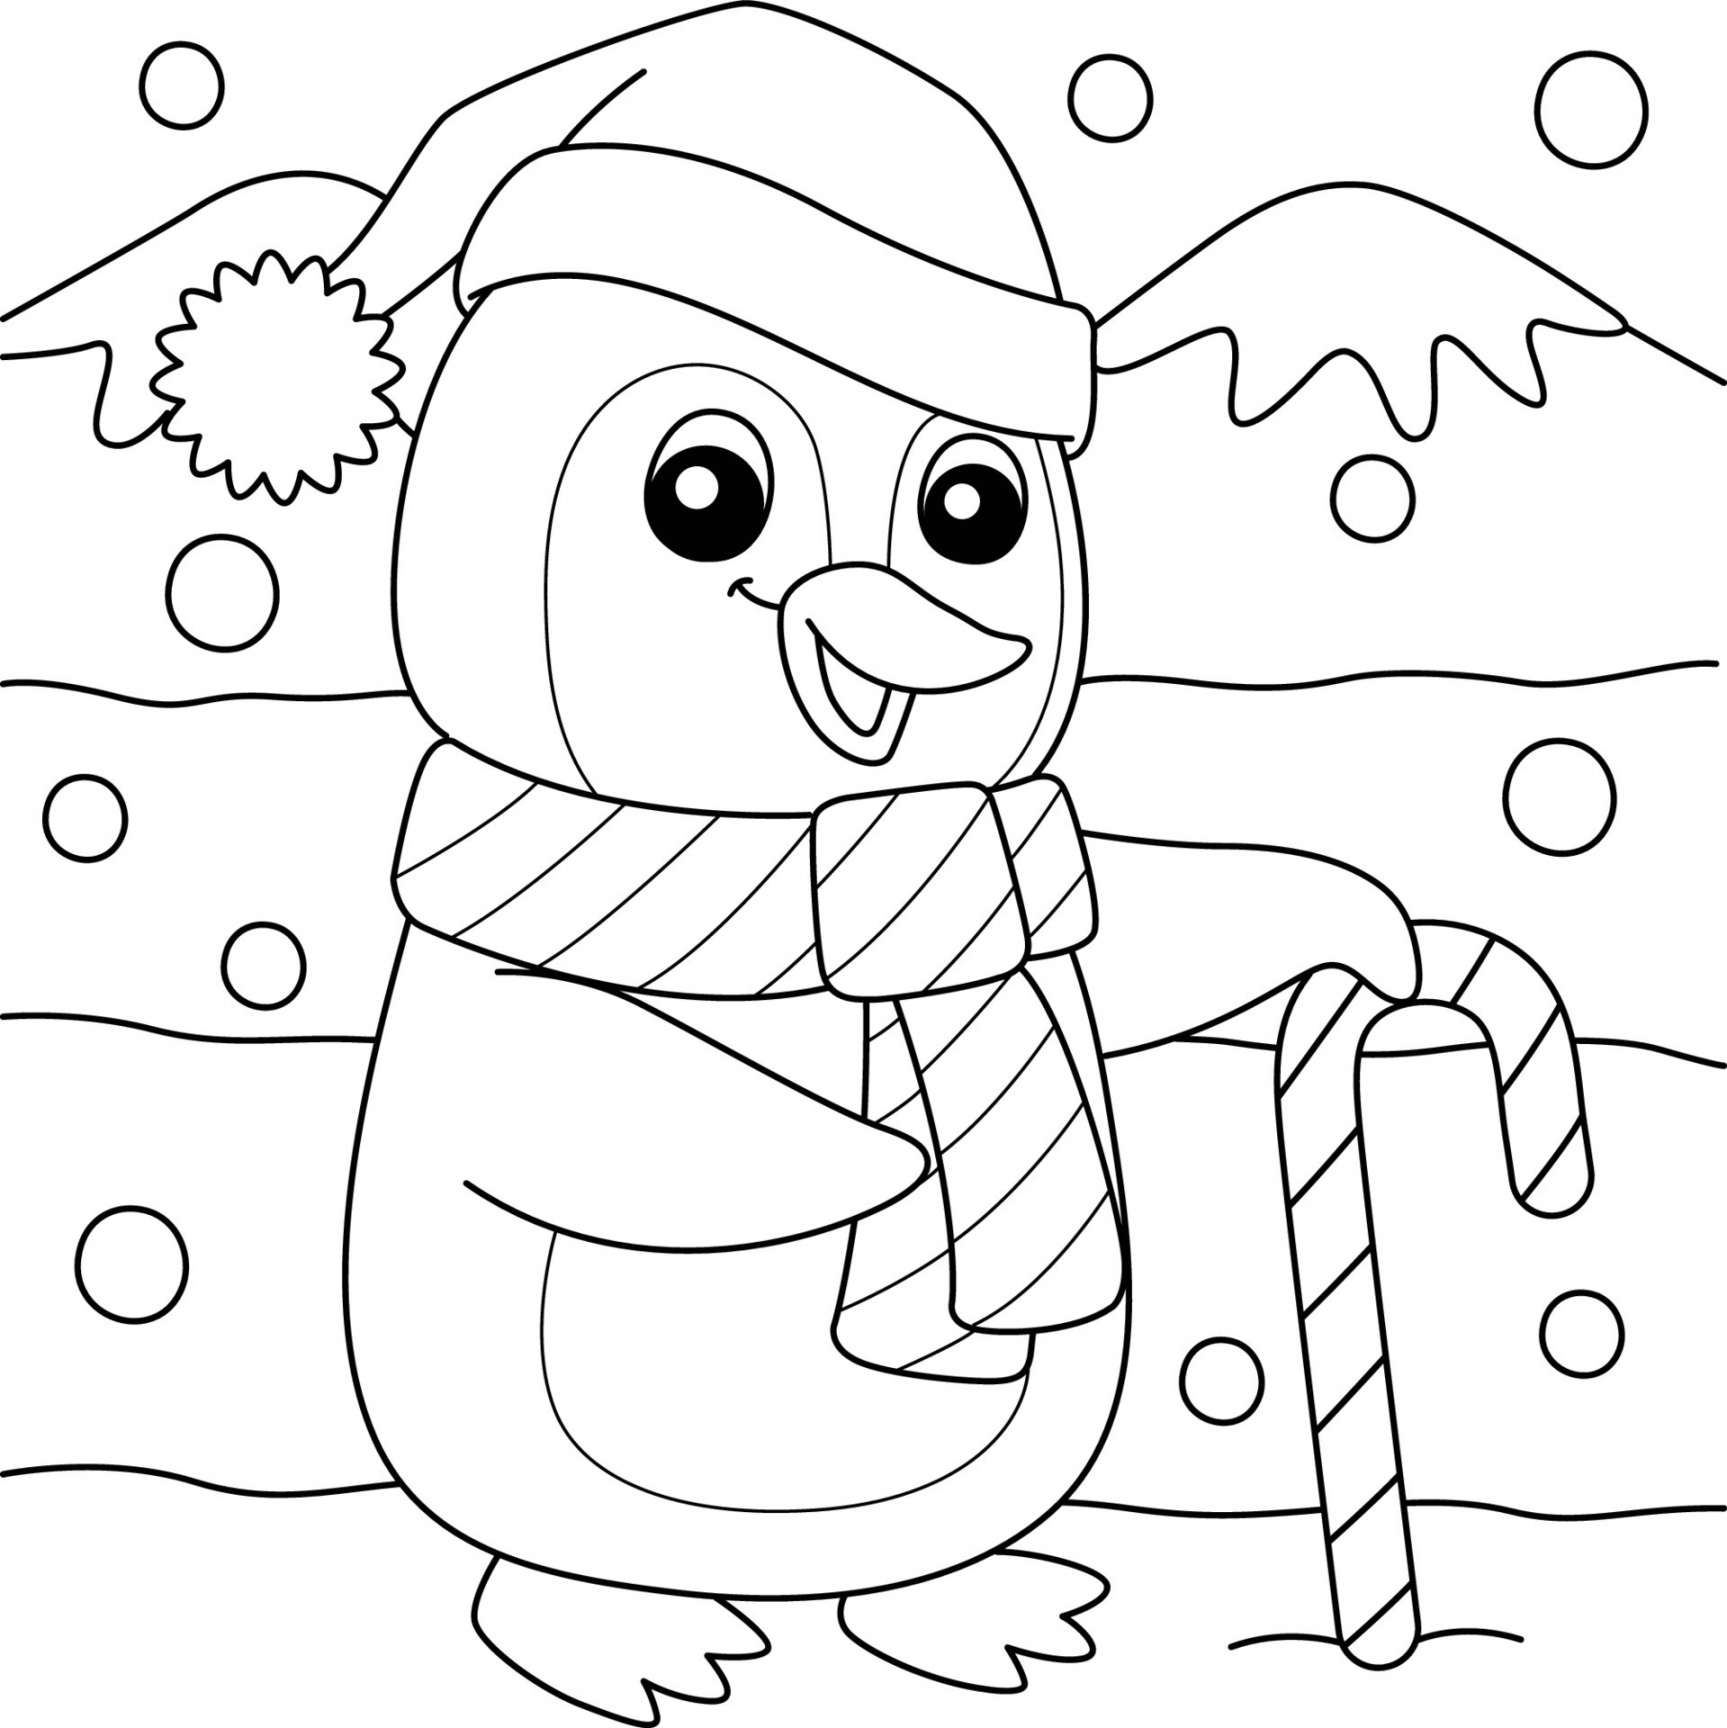 Christmas Free Printables Coloring Pages - Printable - Christmas Coloring Page Vector Art, Icons, and Graphics for Free